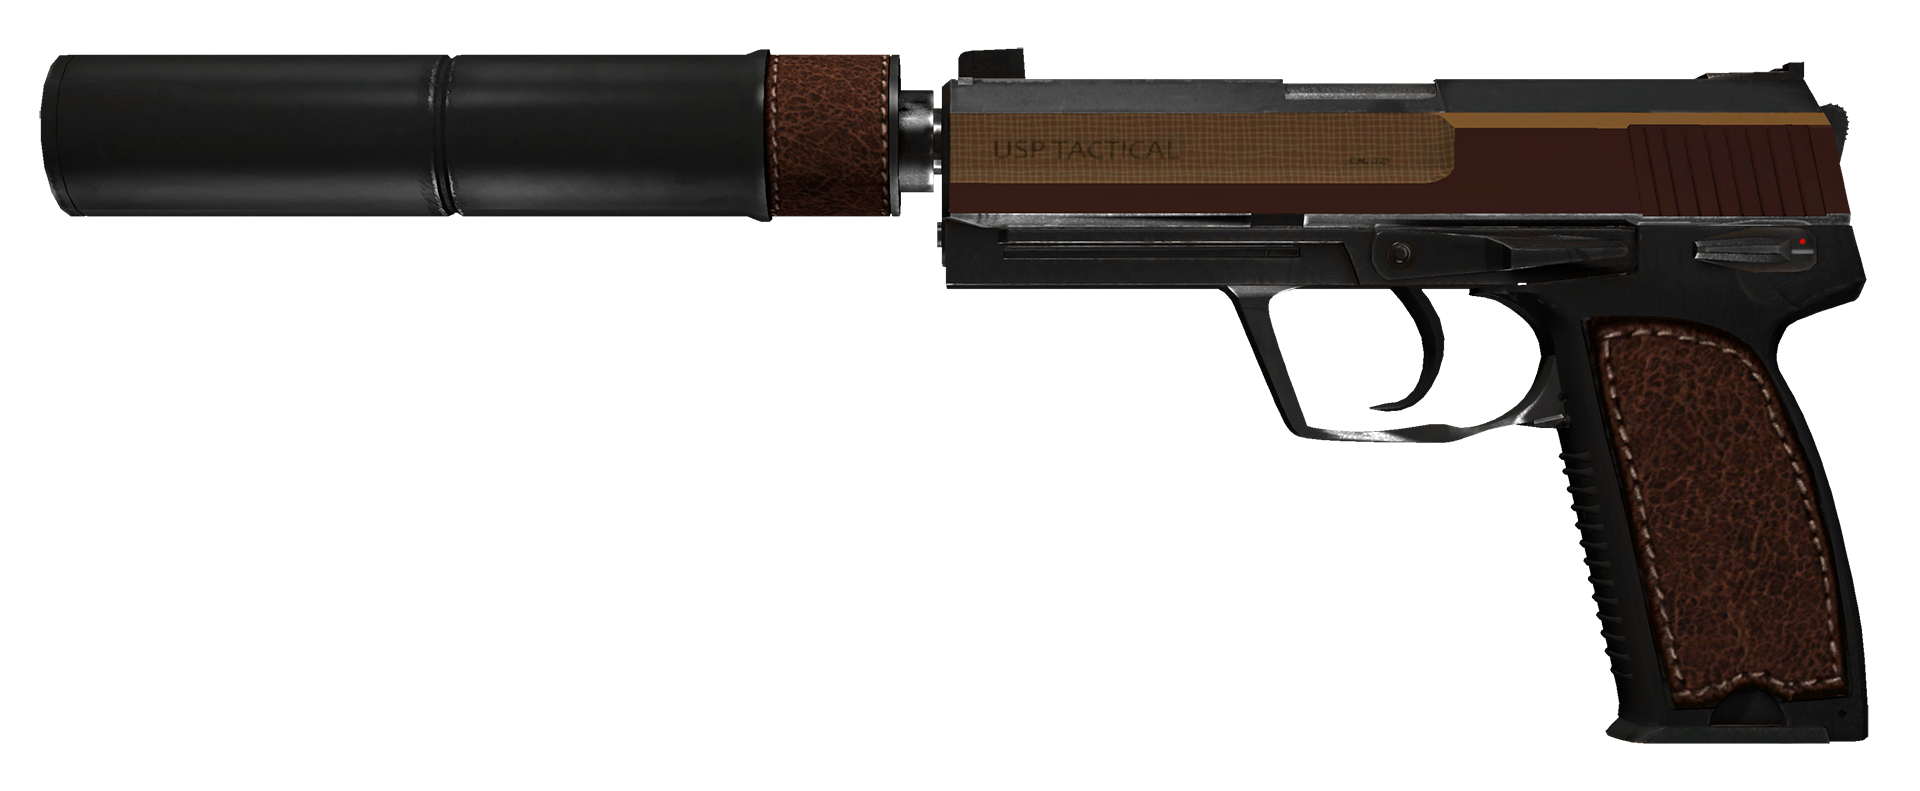 USP-S Business Class Large Rendering